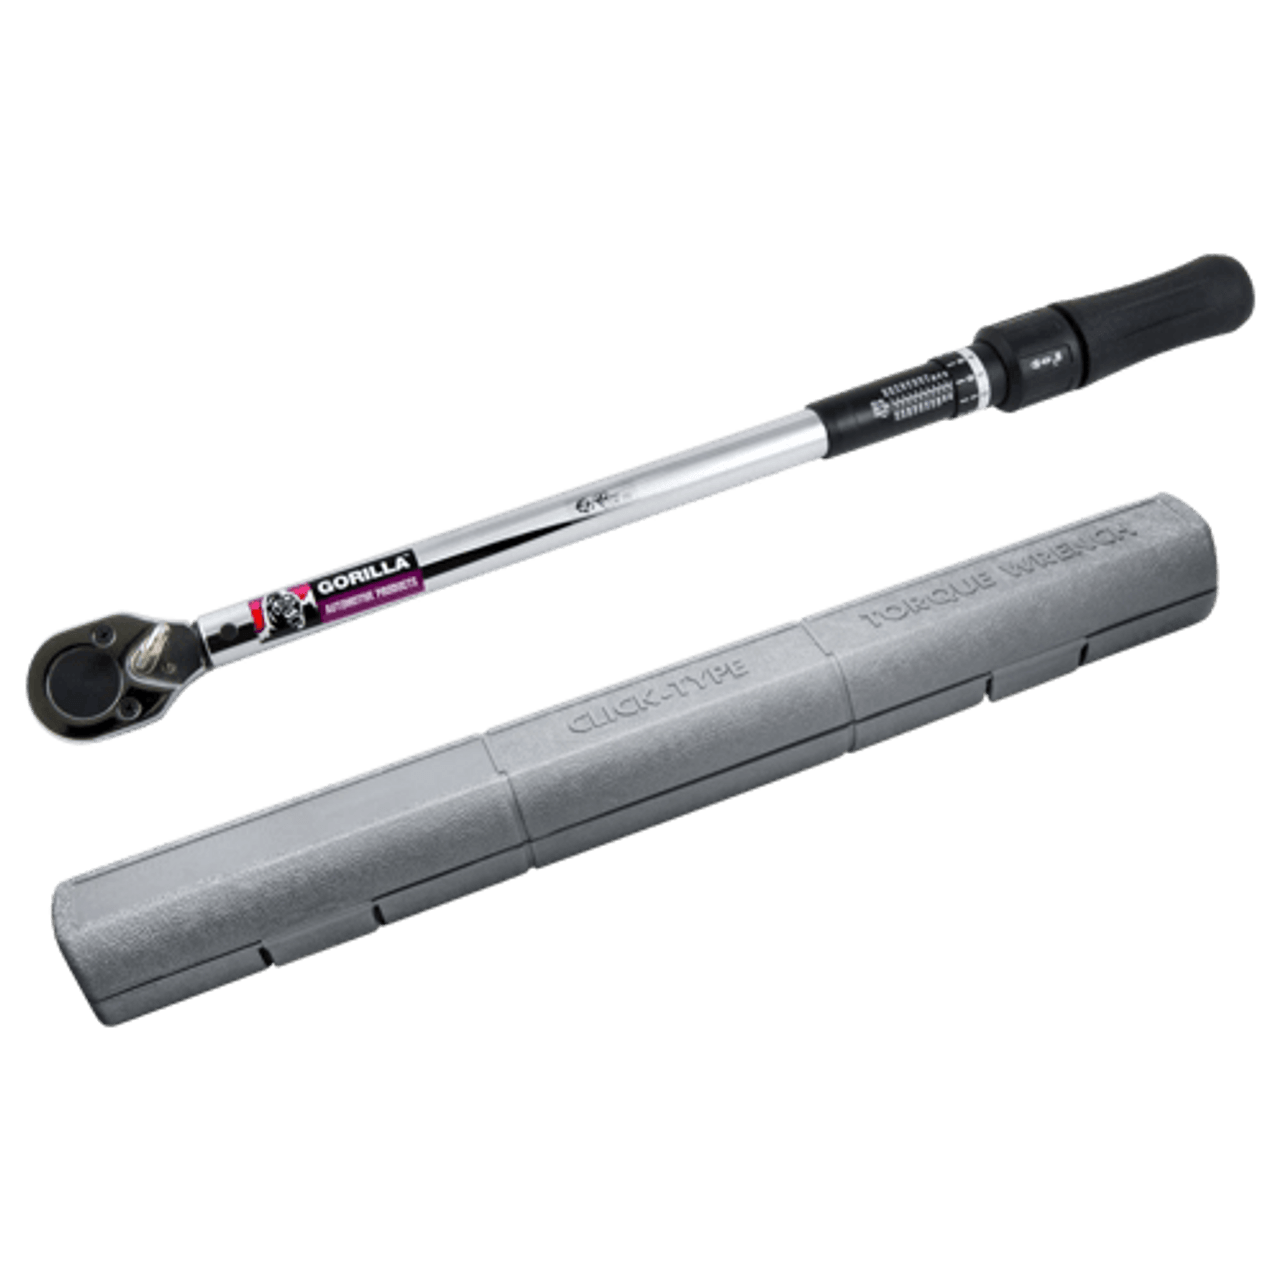 GOR TORQUE WRENCH 50-250 FT/LBS